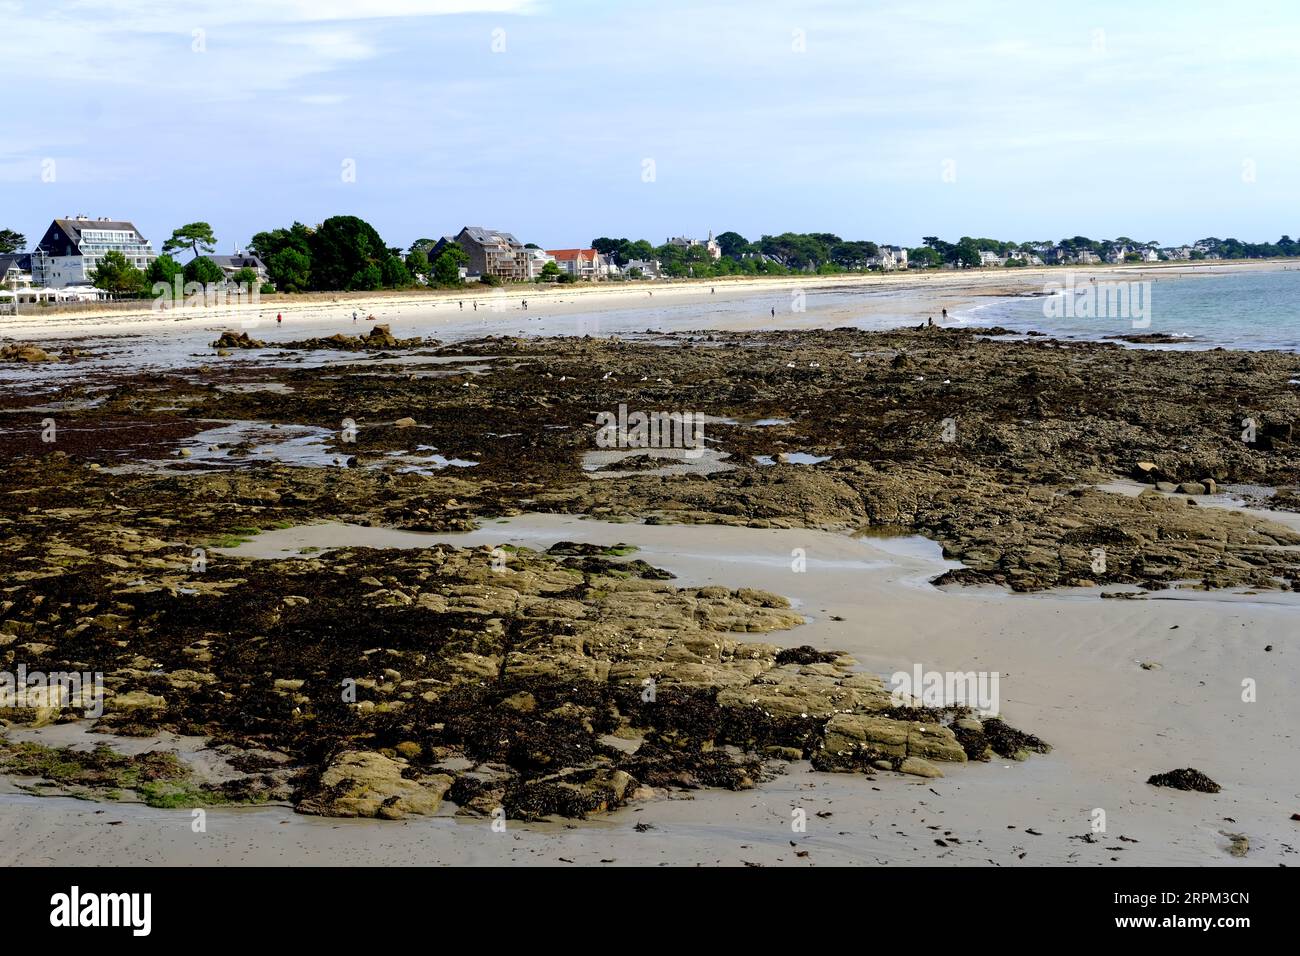 Grande Plage de Carnac is a wide expanse of beach in Carnac in Brittany France Stock Photo